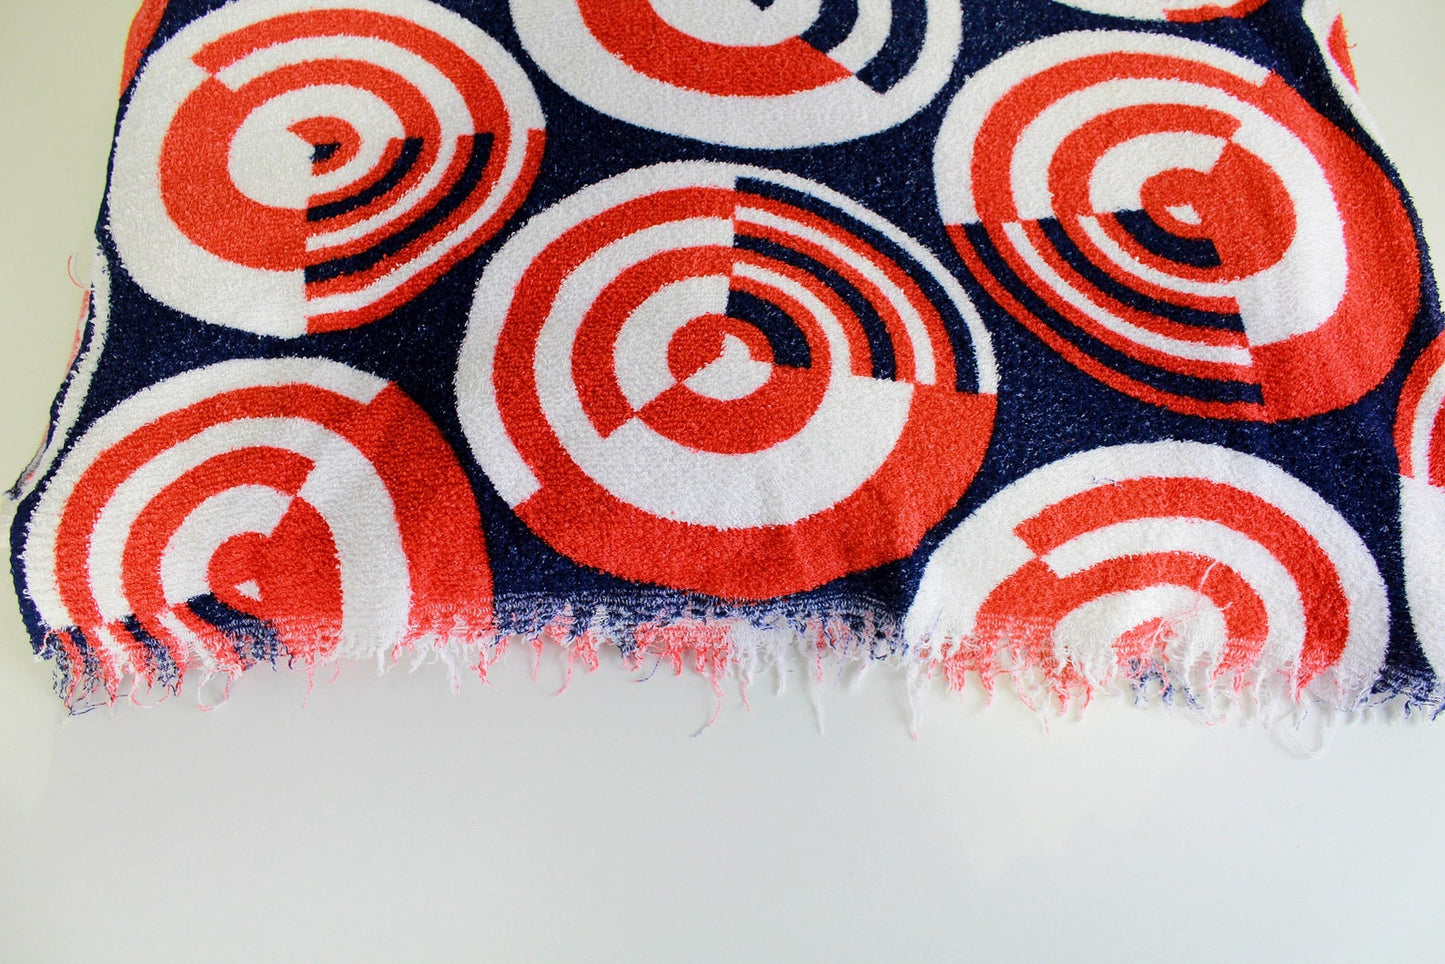 60s/70s Terry Cloth Mod Print Fabric, 4.88 Yards, Vintage Sewing Fabric, Towel Fabric, Psychedelic Mod Circle Print